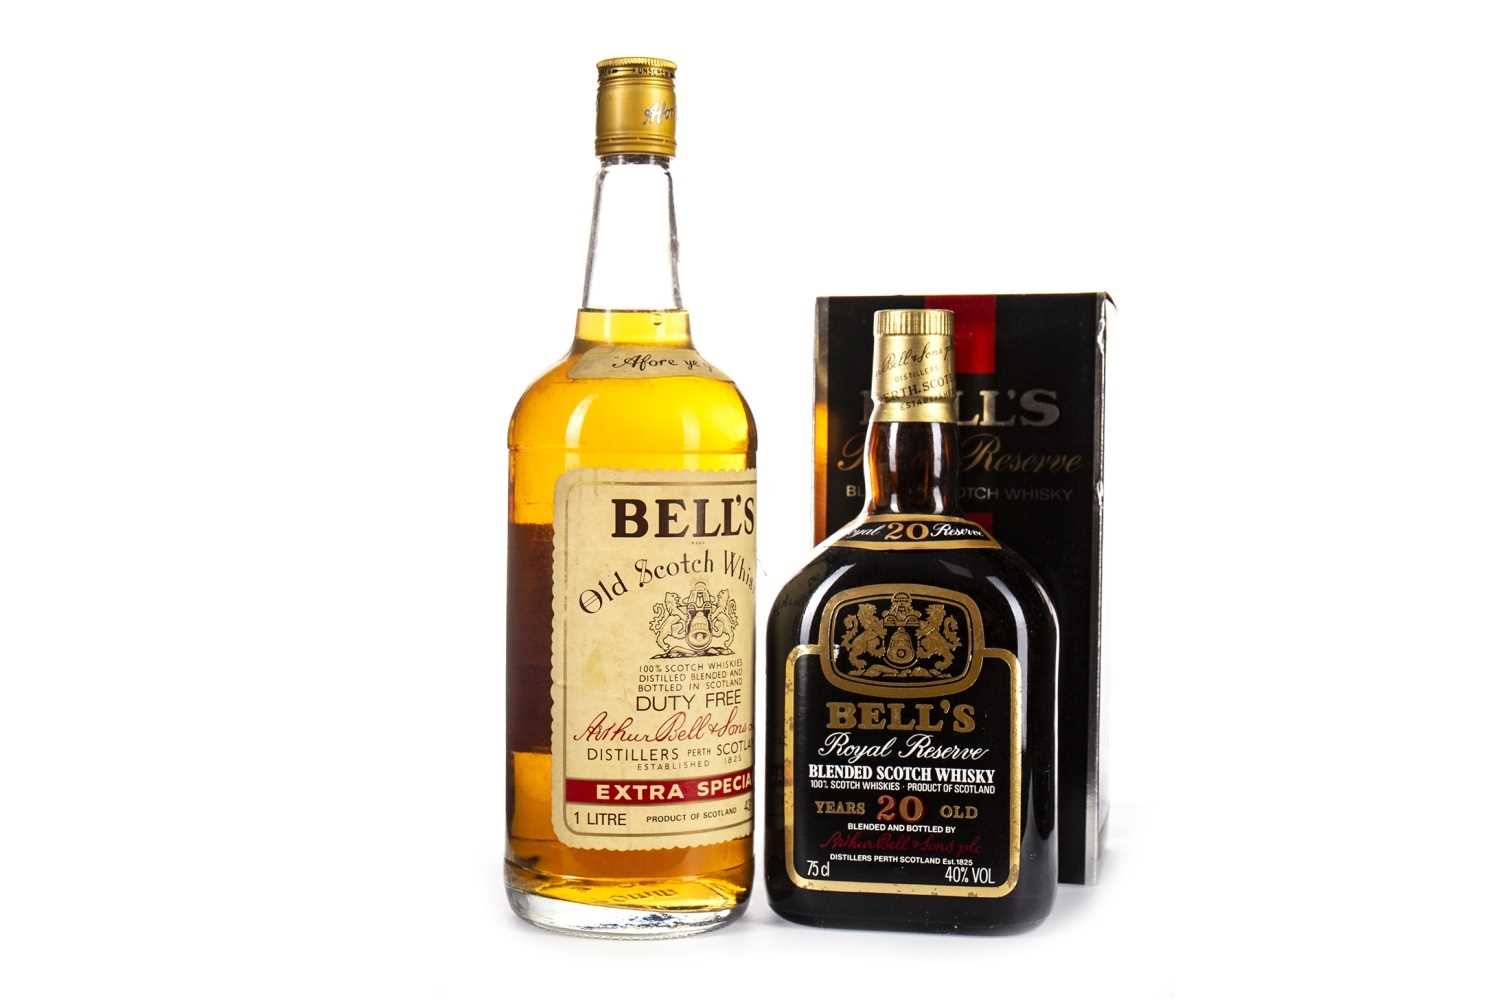 Lot 429 - BELL'S ROYAL RESERVE 20 YEARS OLD & BELL'S EXTRA SPECIAL